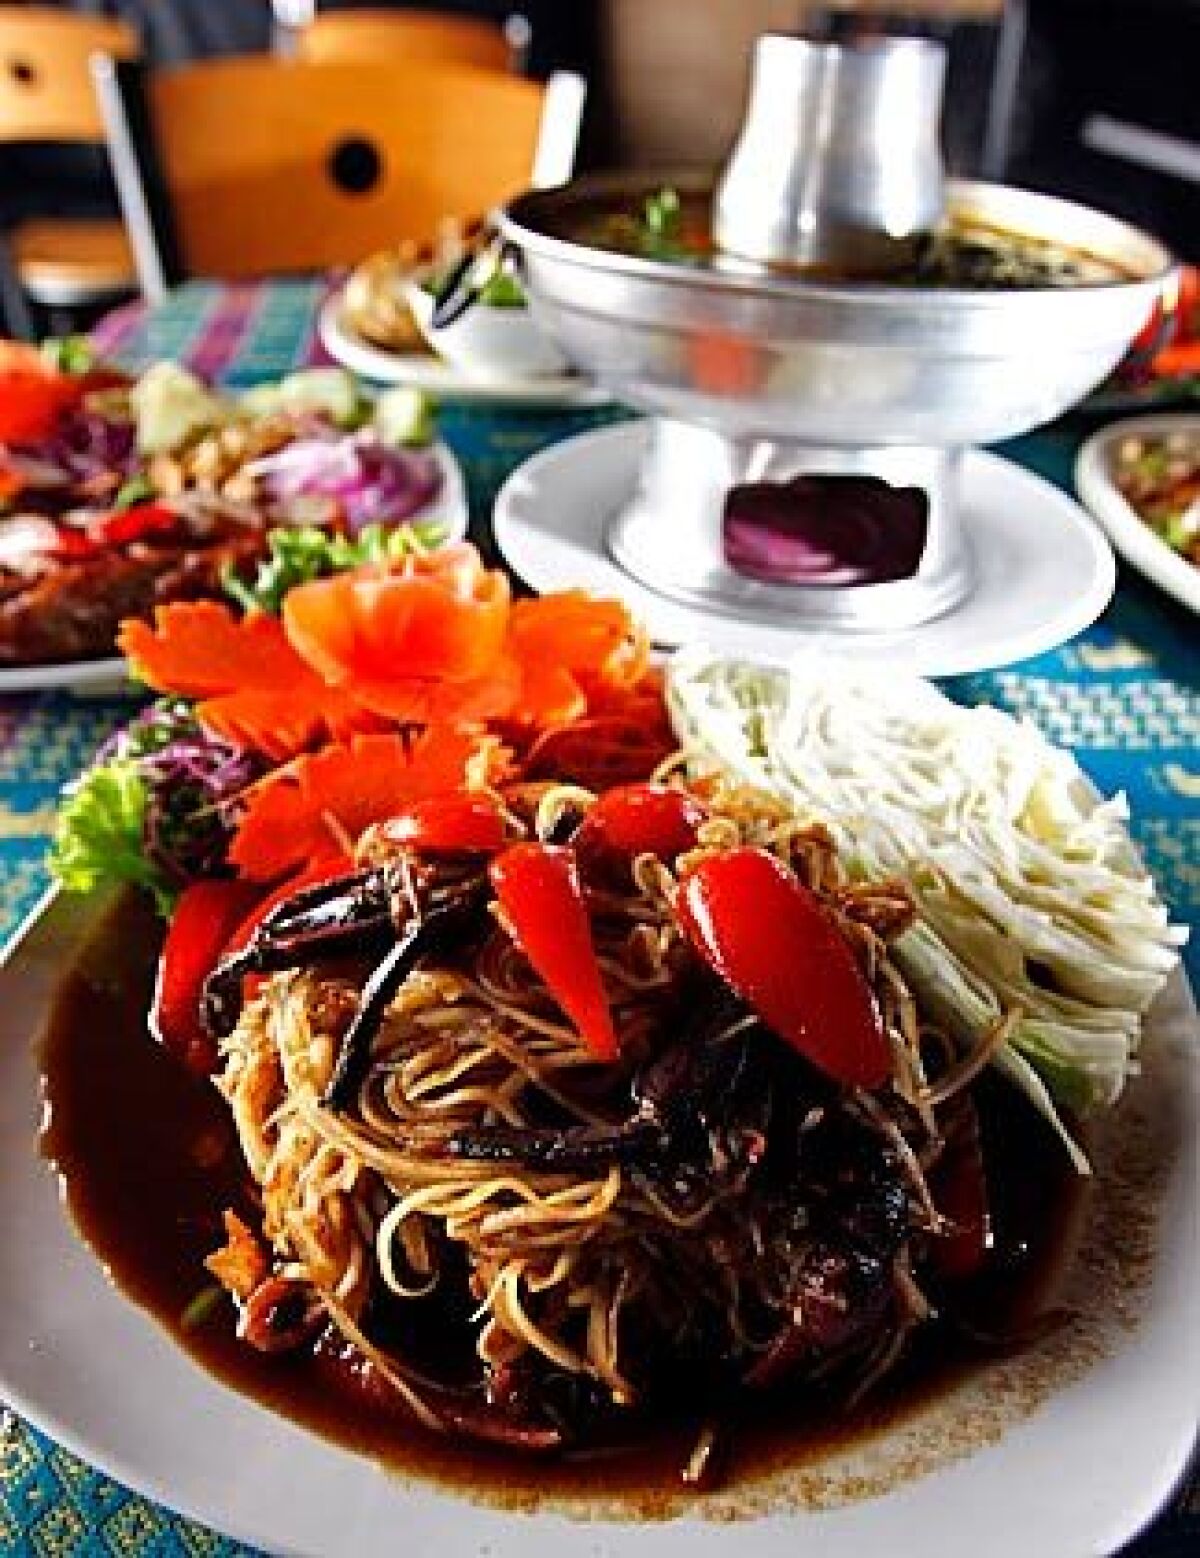 Laotian papaya salad gets its bold flavor from a dressing made with fermented crab paste.